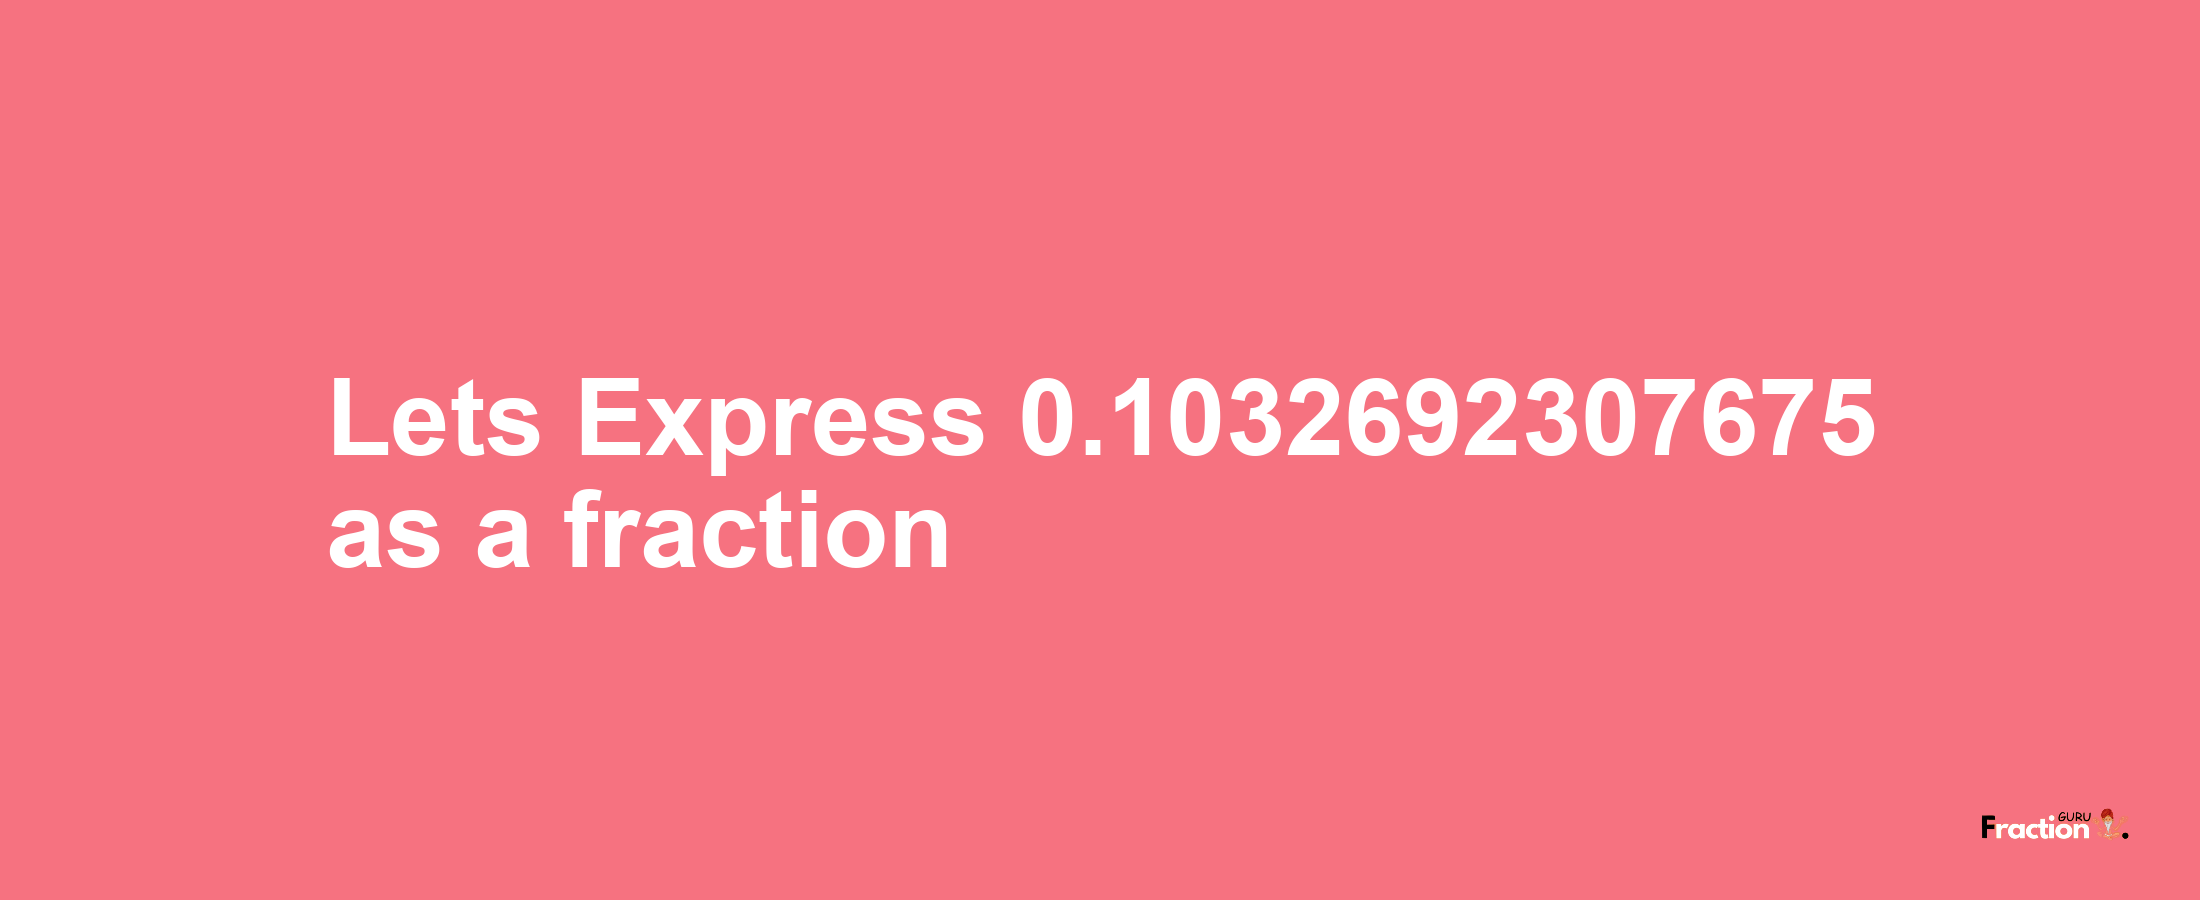 Lets Express 0.1032692307675 as afraction